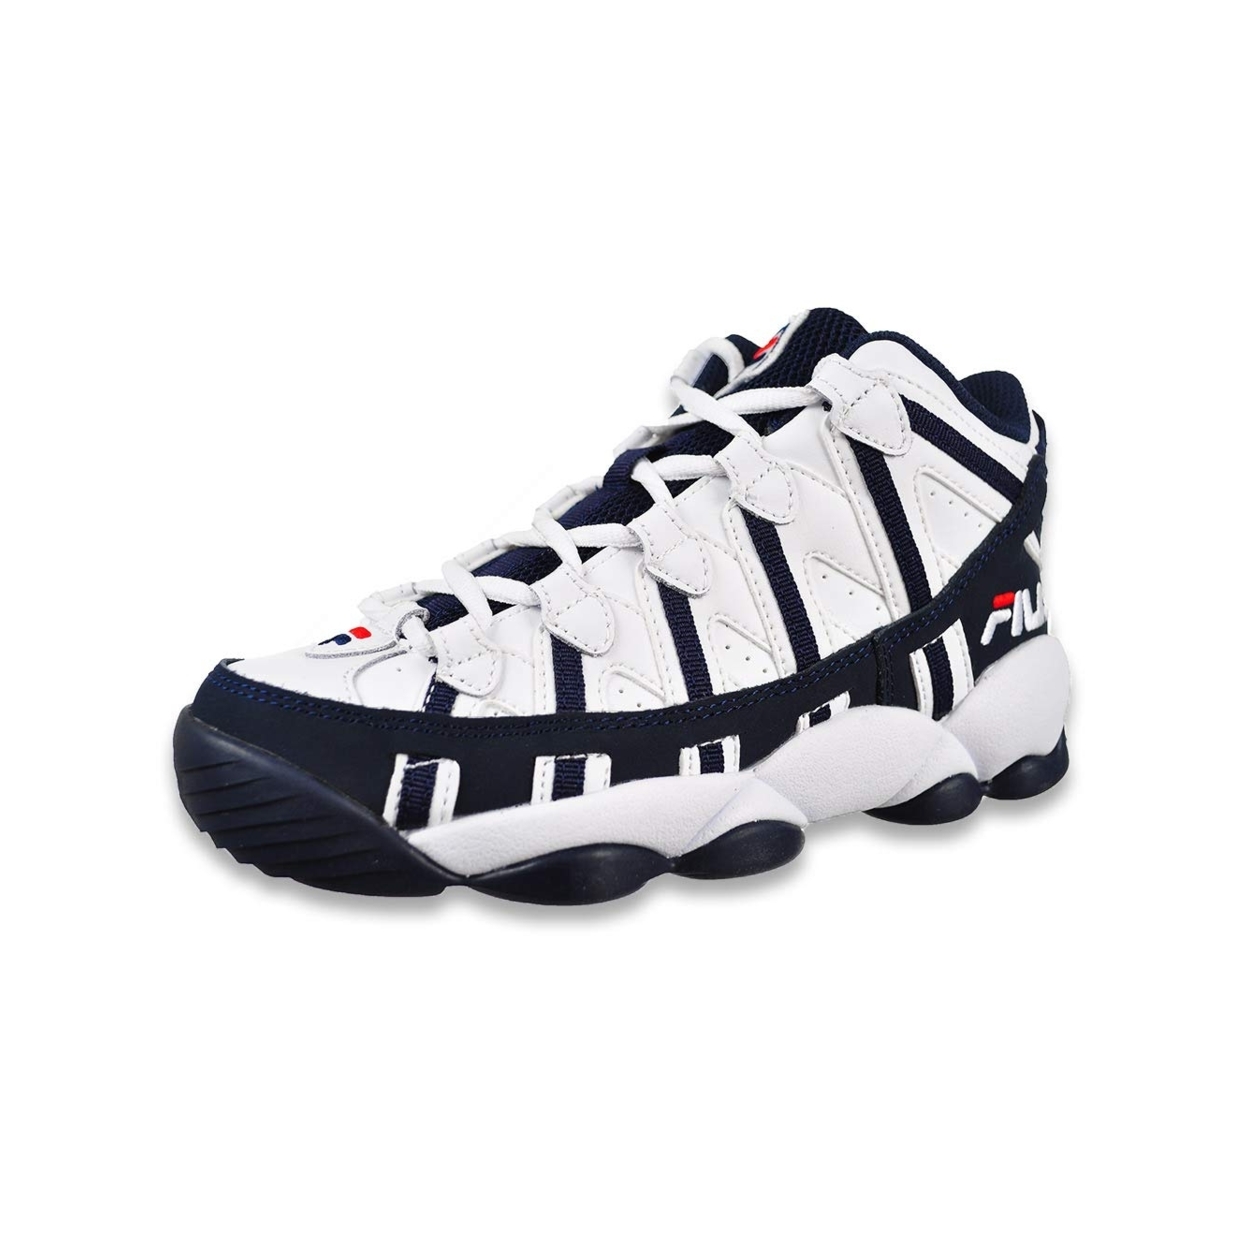 Fila Kids' Stackhouse Spaghetti Basketball Sneakers WHT/FNVY/FRED - WHT/FNVY/FRED, 5 Big Kid